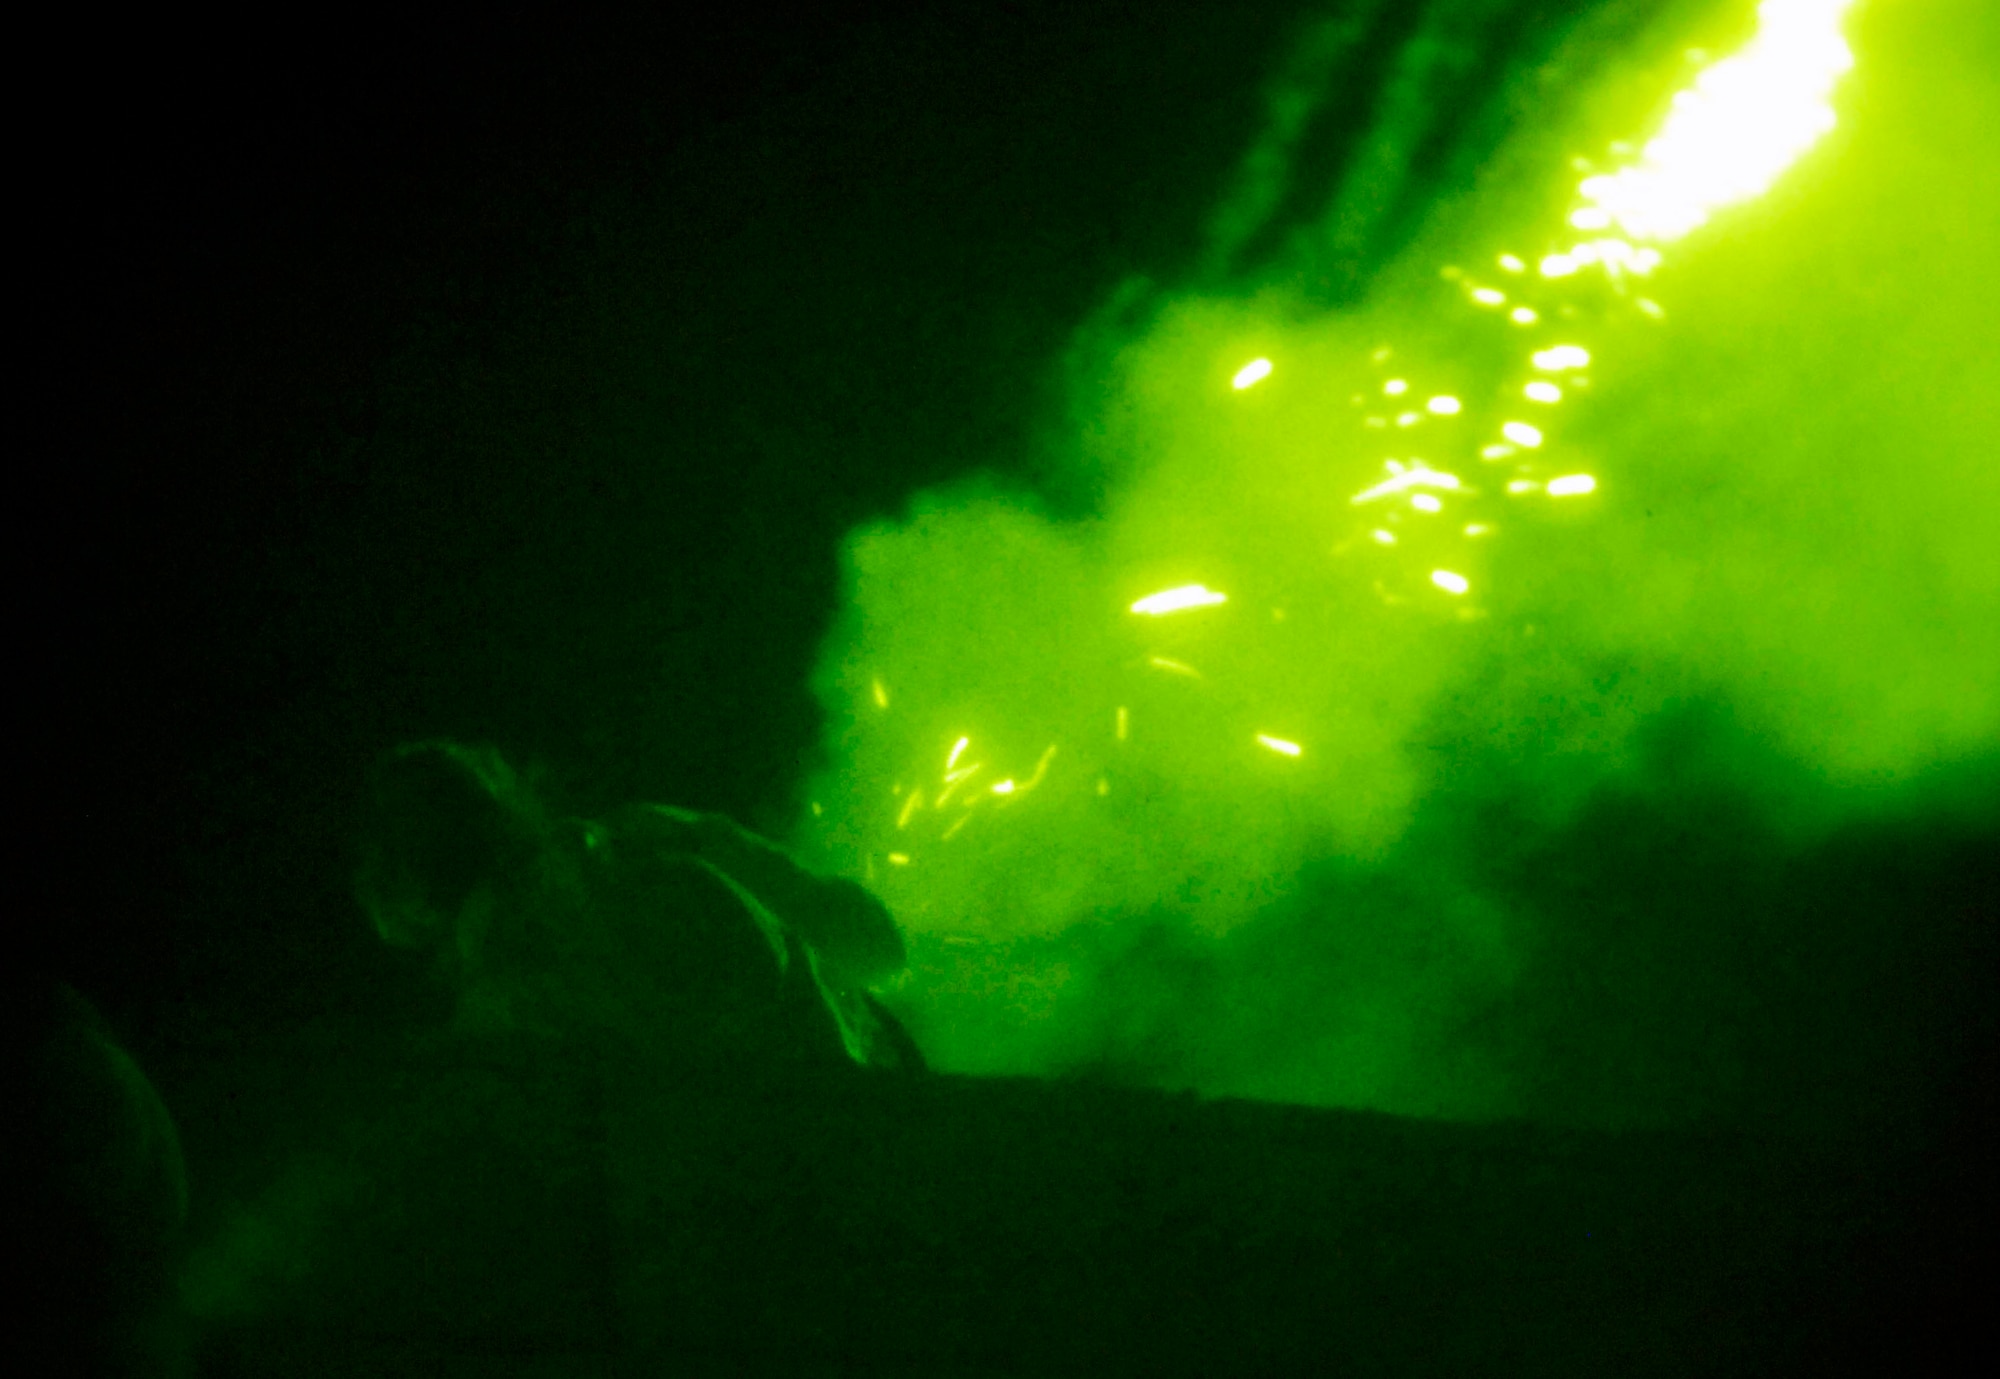 An Air Force member portraying an enemy sniper launches flares during a night engagement to simulate heavy machine gun fire as part of exercise Atlantic Strike VI Nov. 6 at Avon Park, Fla. Atlantic Strike VI is a semi-annual training event sponsored by U.S. Central Command Air Forces at the Avon Park Air Ground Training Complex. The training scenarios are aimed at preparing joint terminal attack controllers and Army joint fires observers for urban close-air-support operations prior to deployment to Iraq and Afghanistan. (U.S. Air Force photo/Airman 1st Class Stephenie Wade) 
